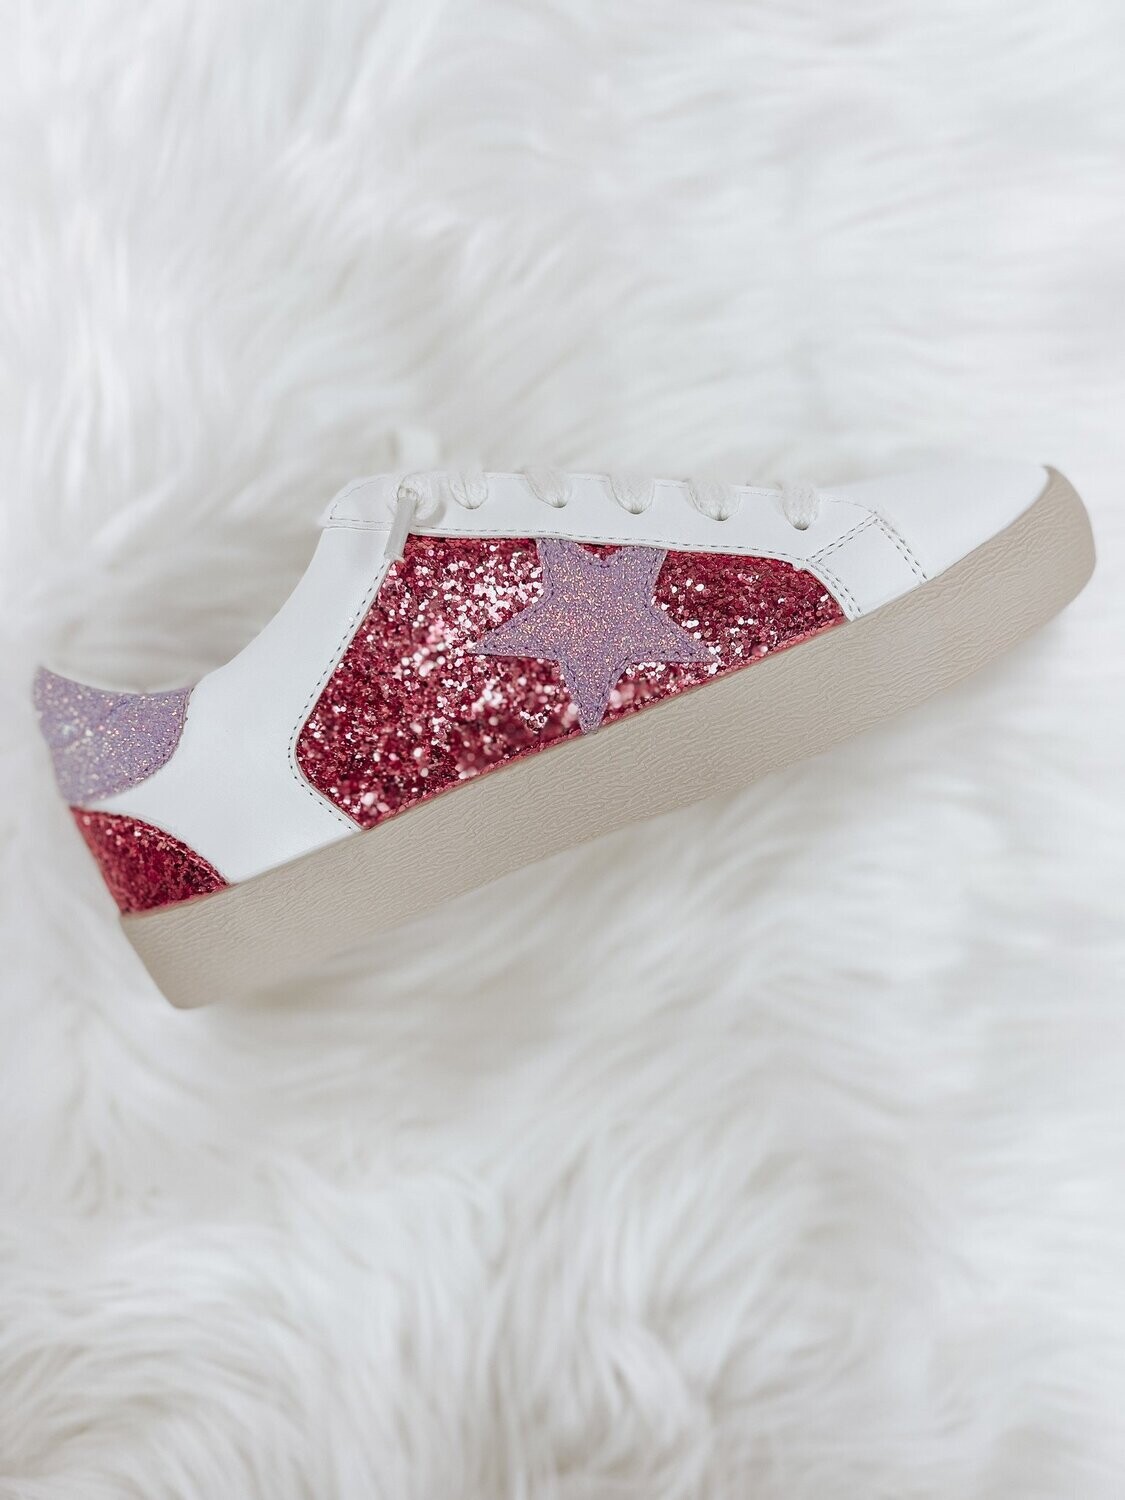 The Lucy Glitter Sneaker, Color: PINK/PURPLE, Size: 6